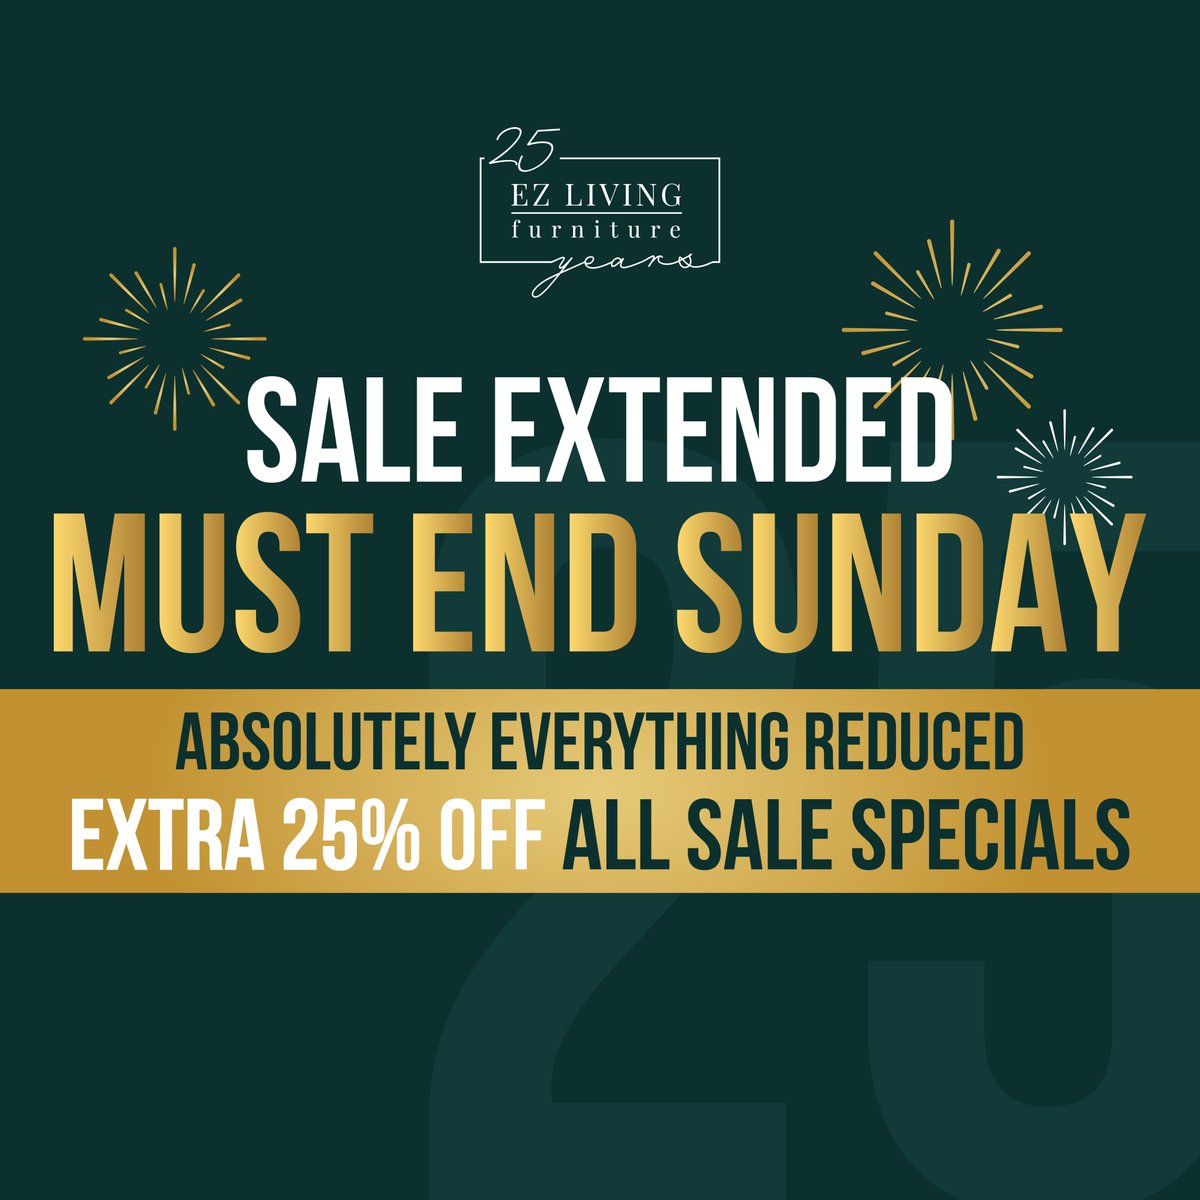 EZ Living Furniture's 25th Birthday Sale has been extended and Must End This Sunday. ️🎊️ Absolutely everything is reduced with an EXTRA 25% off Sale Specials. Shop now in store at the Crescent Shopping Centre.#EZLiving #FurnitureSale